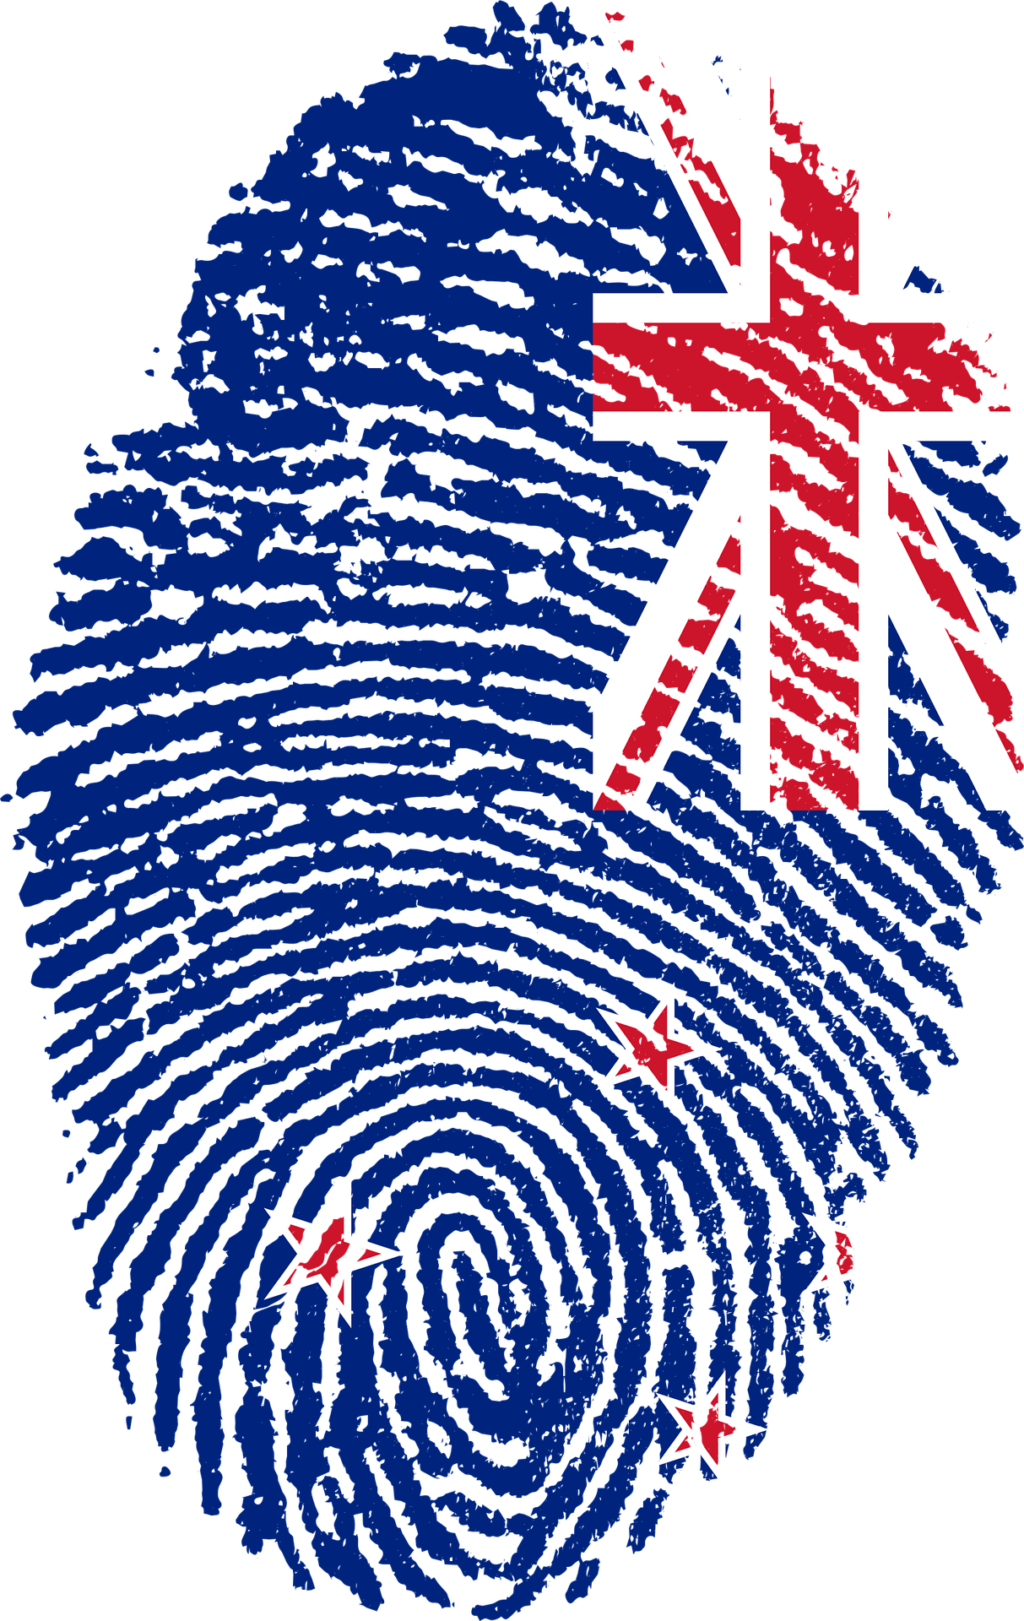 New Zealand: Employment prospects and immigration process